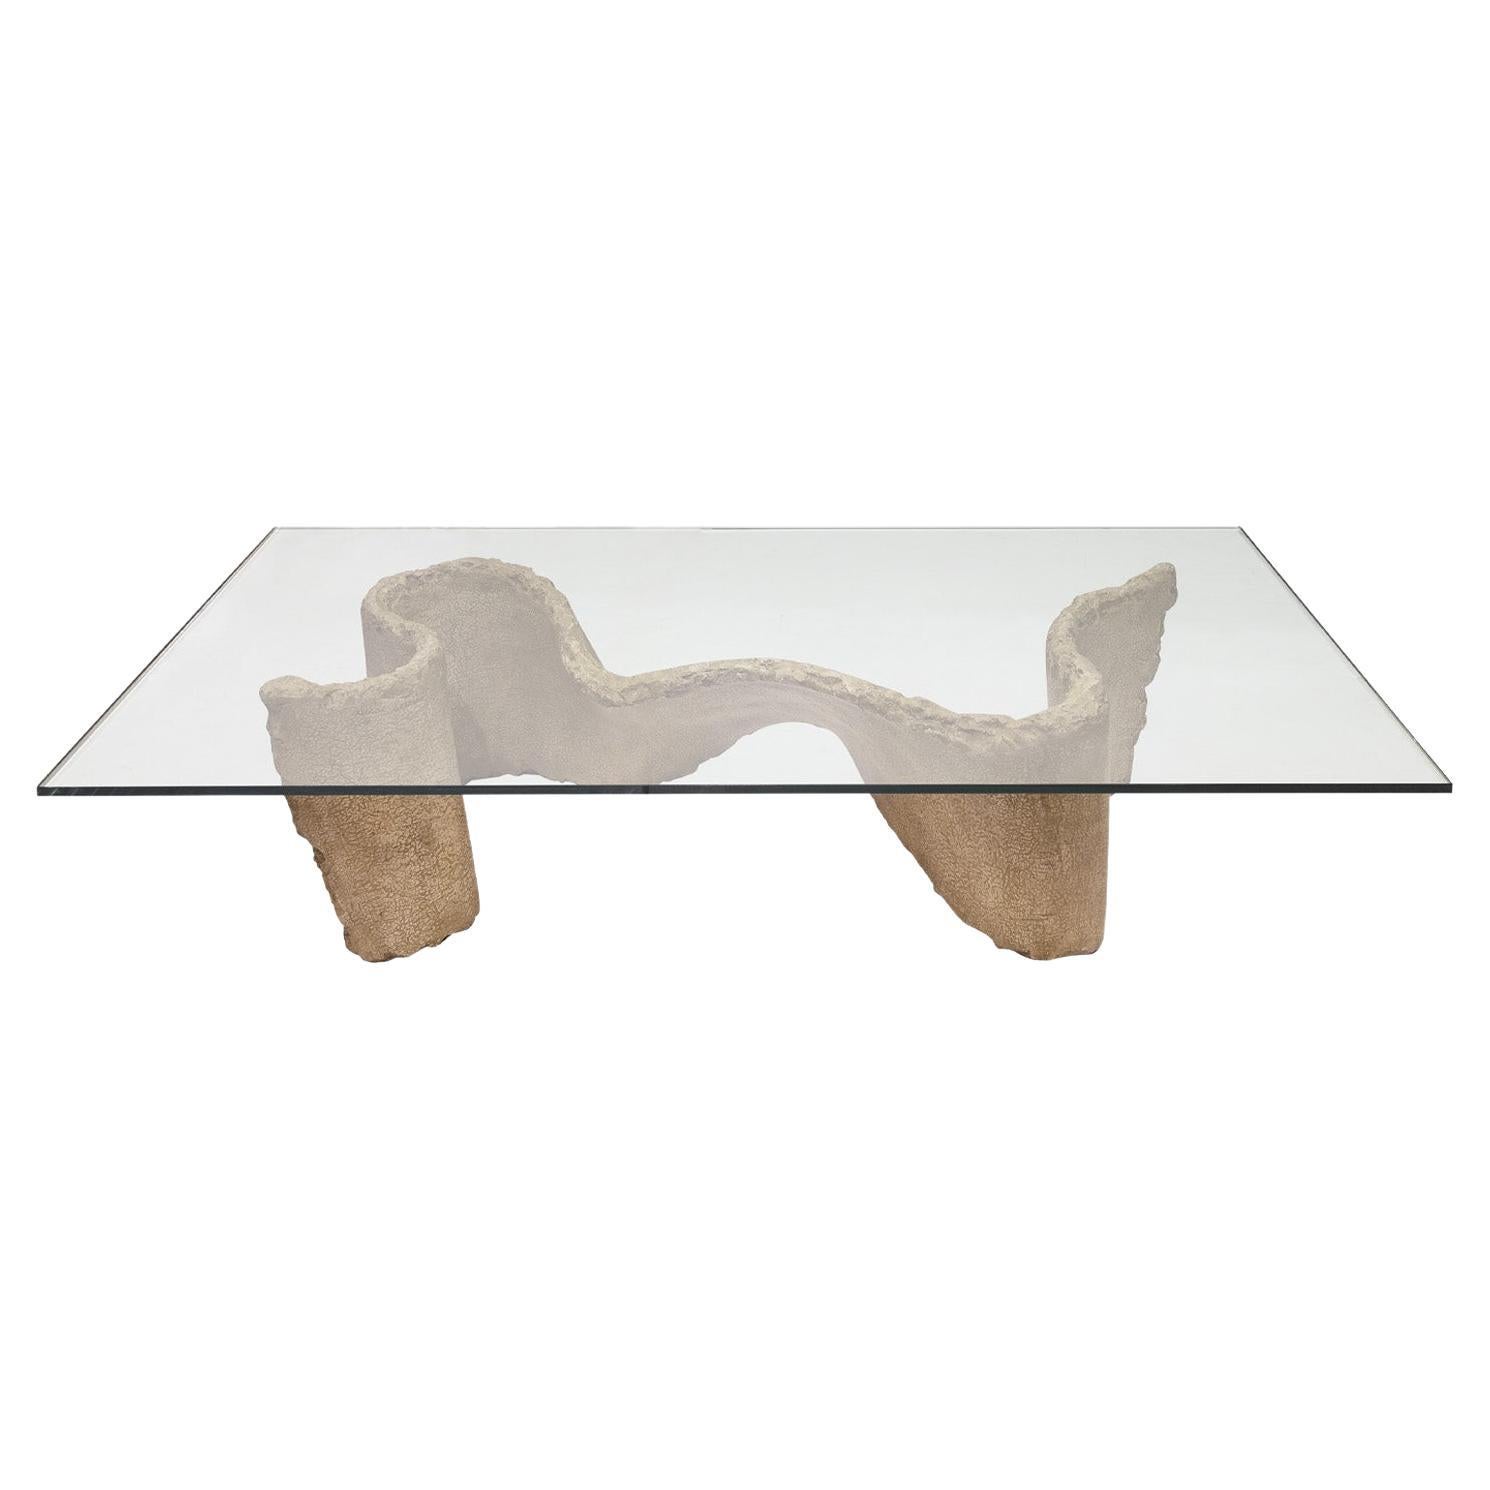 Silas Seandel Sculptural Coffee Table with Glass Top 1970s 'Signed' For Sale